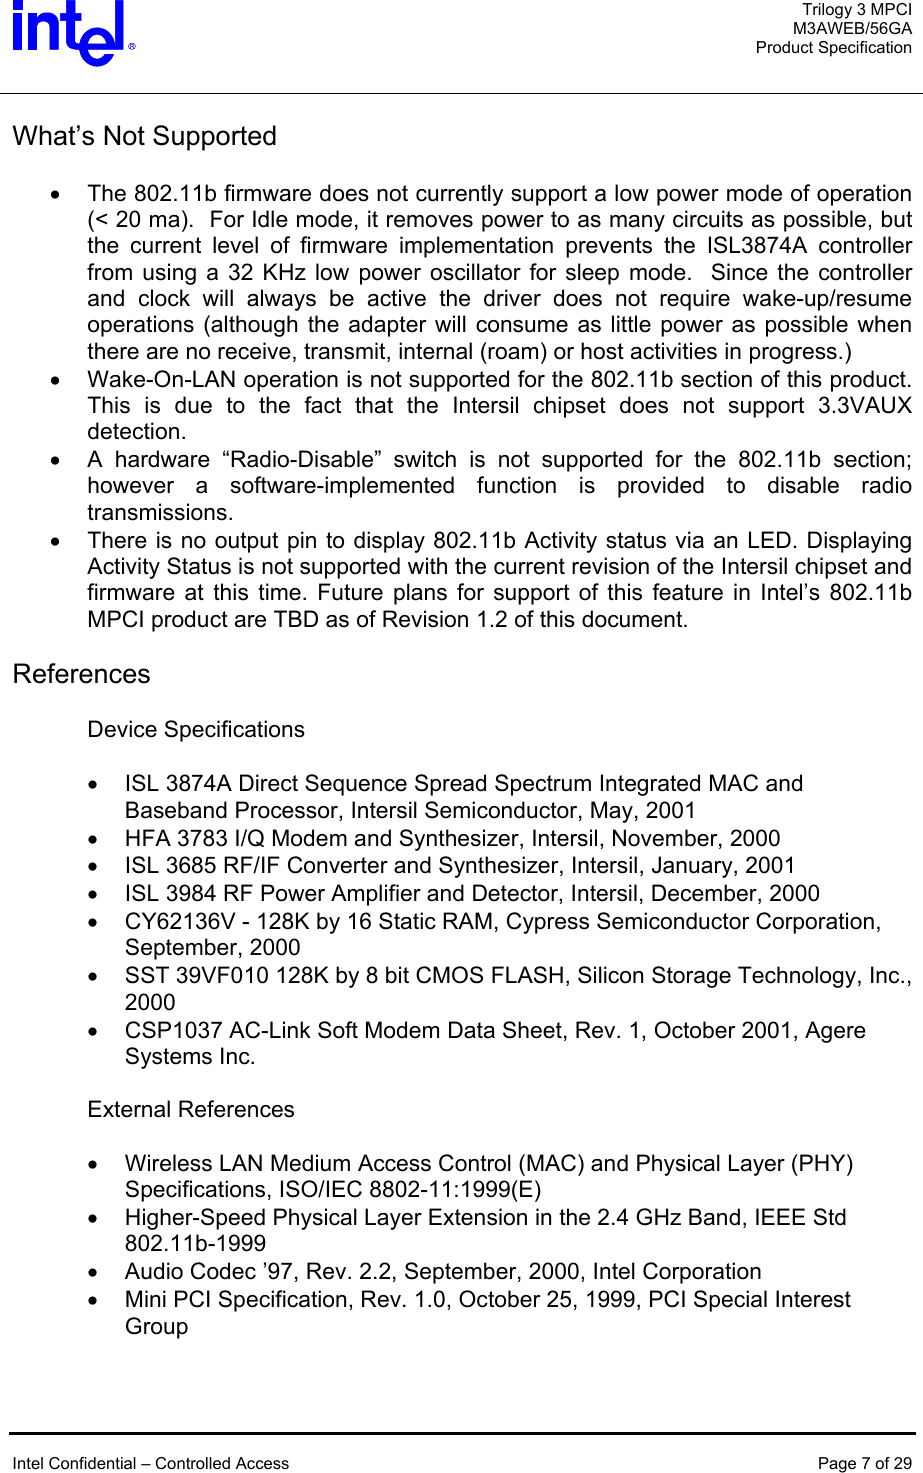  Trilogy 3 MPCI M3AWEB/56GA Product Specification   What’s Not Supported  •  The 802.11b firmware does not currently support a low power mode of operation (&lt; 20 ma).  For Idle mode, it removes power to as many circuits as possible, but the current level of firmware implementation prevents the ISL3874A controller from using a 32 KHz low power oscillator for sleep mode.  Since the controller and clock will always be active the driver does not require wake-up/resume operations (although the adapter will consume as little power as possible when there are no receive, transmit, internal (roam) or host activities in progress.)  •  Wake-On-LAN operation is not supported for the 802.11b section of this product.  This is due to the fact that the Intersil chipset does not support 3.3VAUX detection. •  A hardware “Radio-Disable” switch is not supported for the 802.11b section; however a software-implemented function is provided to disable radio transmissions. •  There is no output pin to display 802.11b Activity status via an LED. Displaying Activity Status is not supported with the current revision of the Intersil chipset and firmware at this time. Future plans for support of this feature in Intel’s 802.11b MPCI product are TBD as of Revision 1.2 of this document.   References  Device Specifications  •  ISL 3874A Direct Sequence Spread Spectrum Integrated MAC and Baseband Processor, Intersil Semiconductor, May, 2001 •  HFA 3783 I/Q Modem and Synthesizer, Intersil, November, 2000 •  ISL 3685 RF/IF Converter and Synthesizer, Intersil, January, 2001 •  ISL 3984 RF Power Amplifier and Detector, Intersil, December, 2000 •  CY62136V - 128K by 16 Static RAM, Cypress Semiconductor Corporation, September, 2000 •  SST 39VF010 128K by 8 bit CMOS FLASH, Silicon Storage Technology, Inc., 2000 •  CSP1037 AC-Link Soft Modem Data Sheet, Rev. 1, October 2001, Agere Systems Inc.  External References  •  Wireless LAN Medium Access Control (MAC) and Physical Layer (PHY) Specifications, ISO/IEC 8802-11:1999(E) •  Higher-Speed Physical Layer Extension in the 2.4 GHz Band, IEEE Std 802.11b-1999 •  Audio Codec ’97, Rev. 2.2, September, 2000, Intel Corporation •  Mini PCI Specification, Rev. 1.0, October 25, 1999, PCI Special Interest Group     Intel Confidential – Controlled Access  Page 7 of 29  